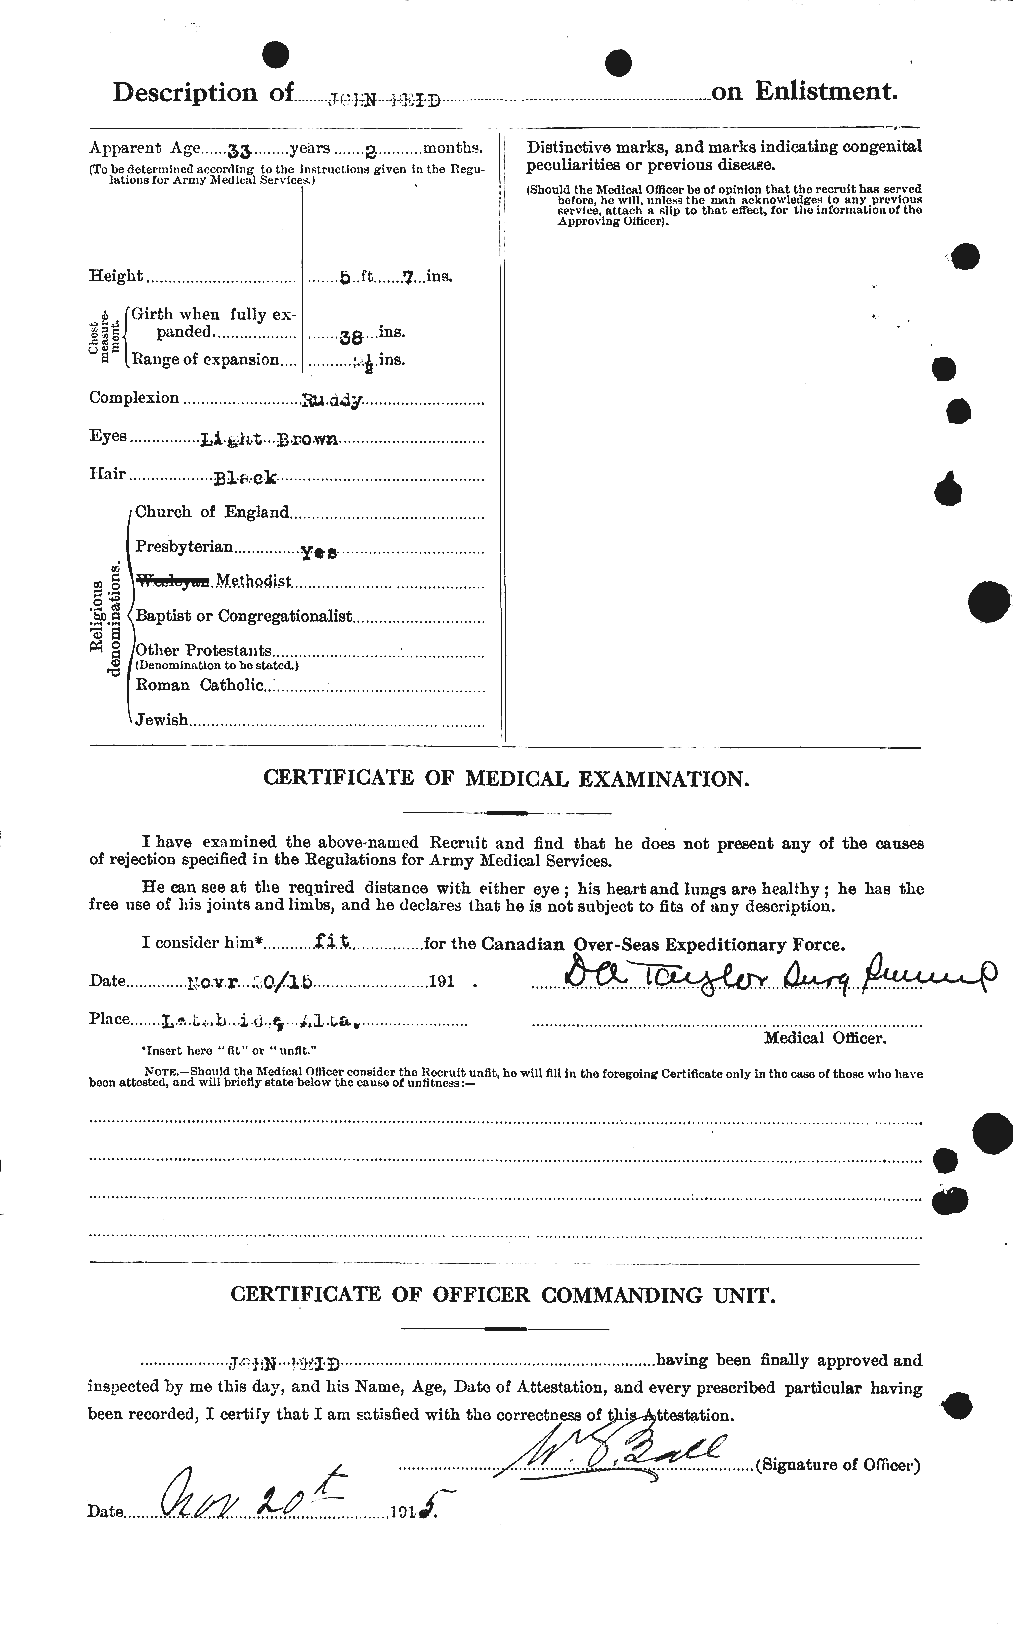 Personnel Records of the First World War - CEF 598788b